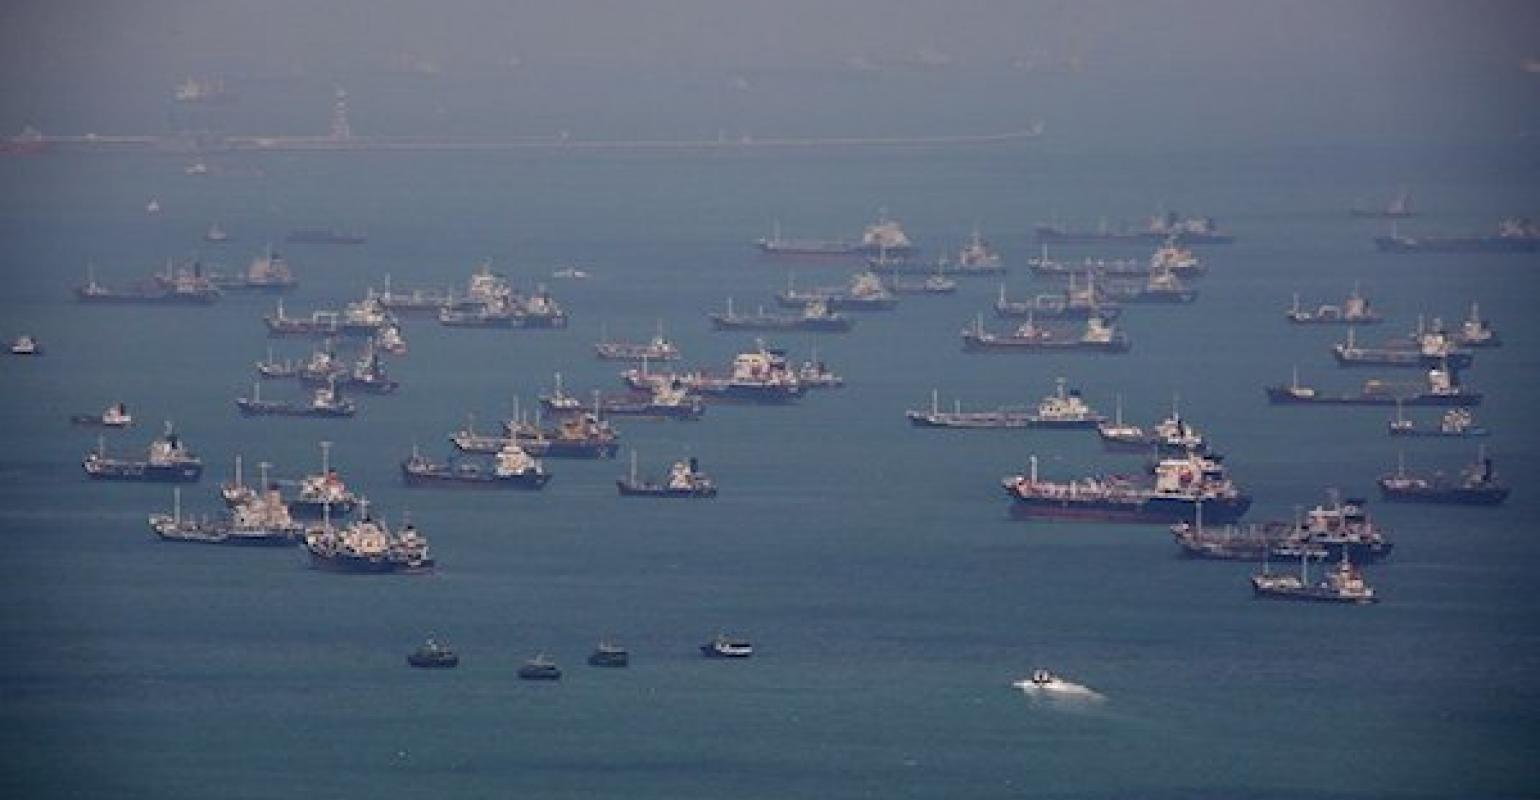 Ships at Anchor in Singapore